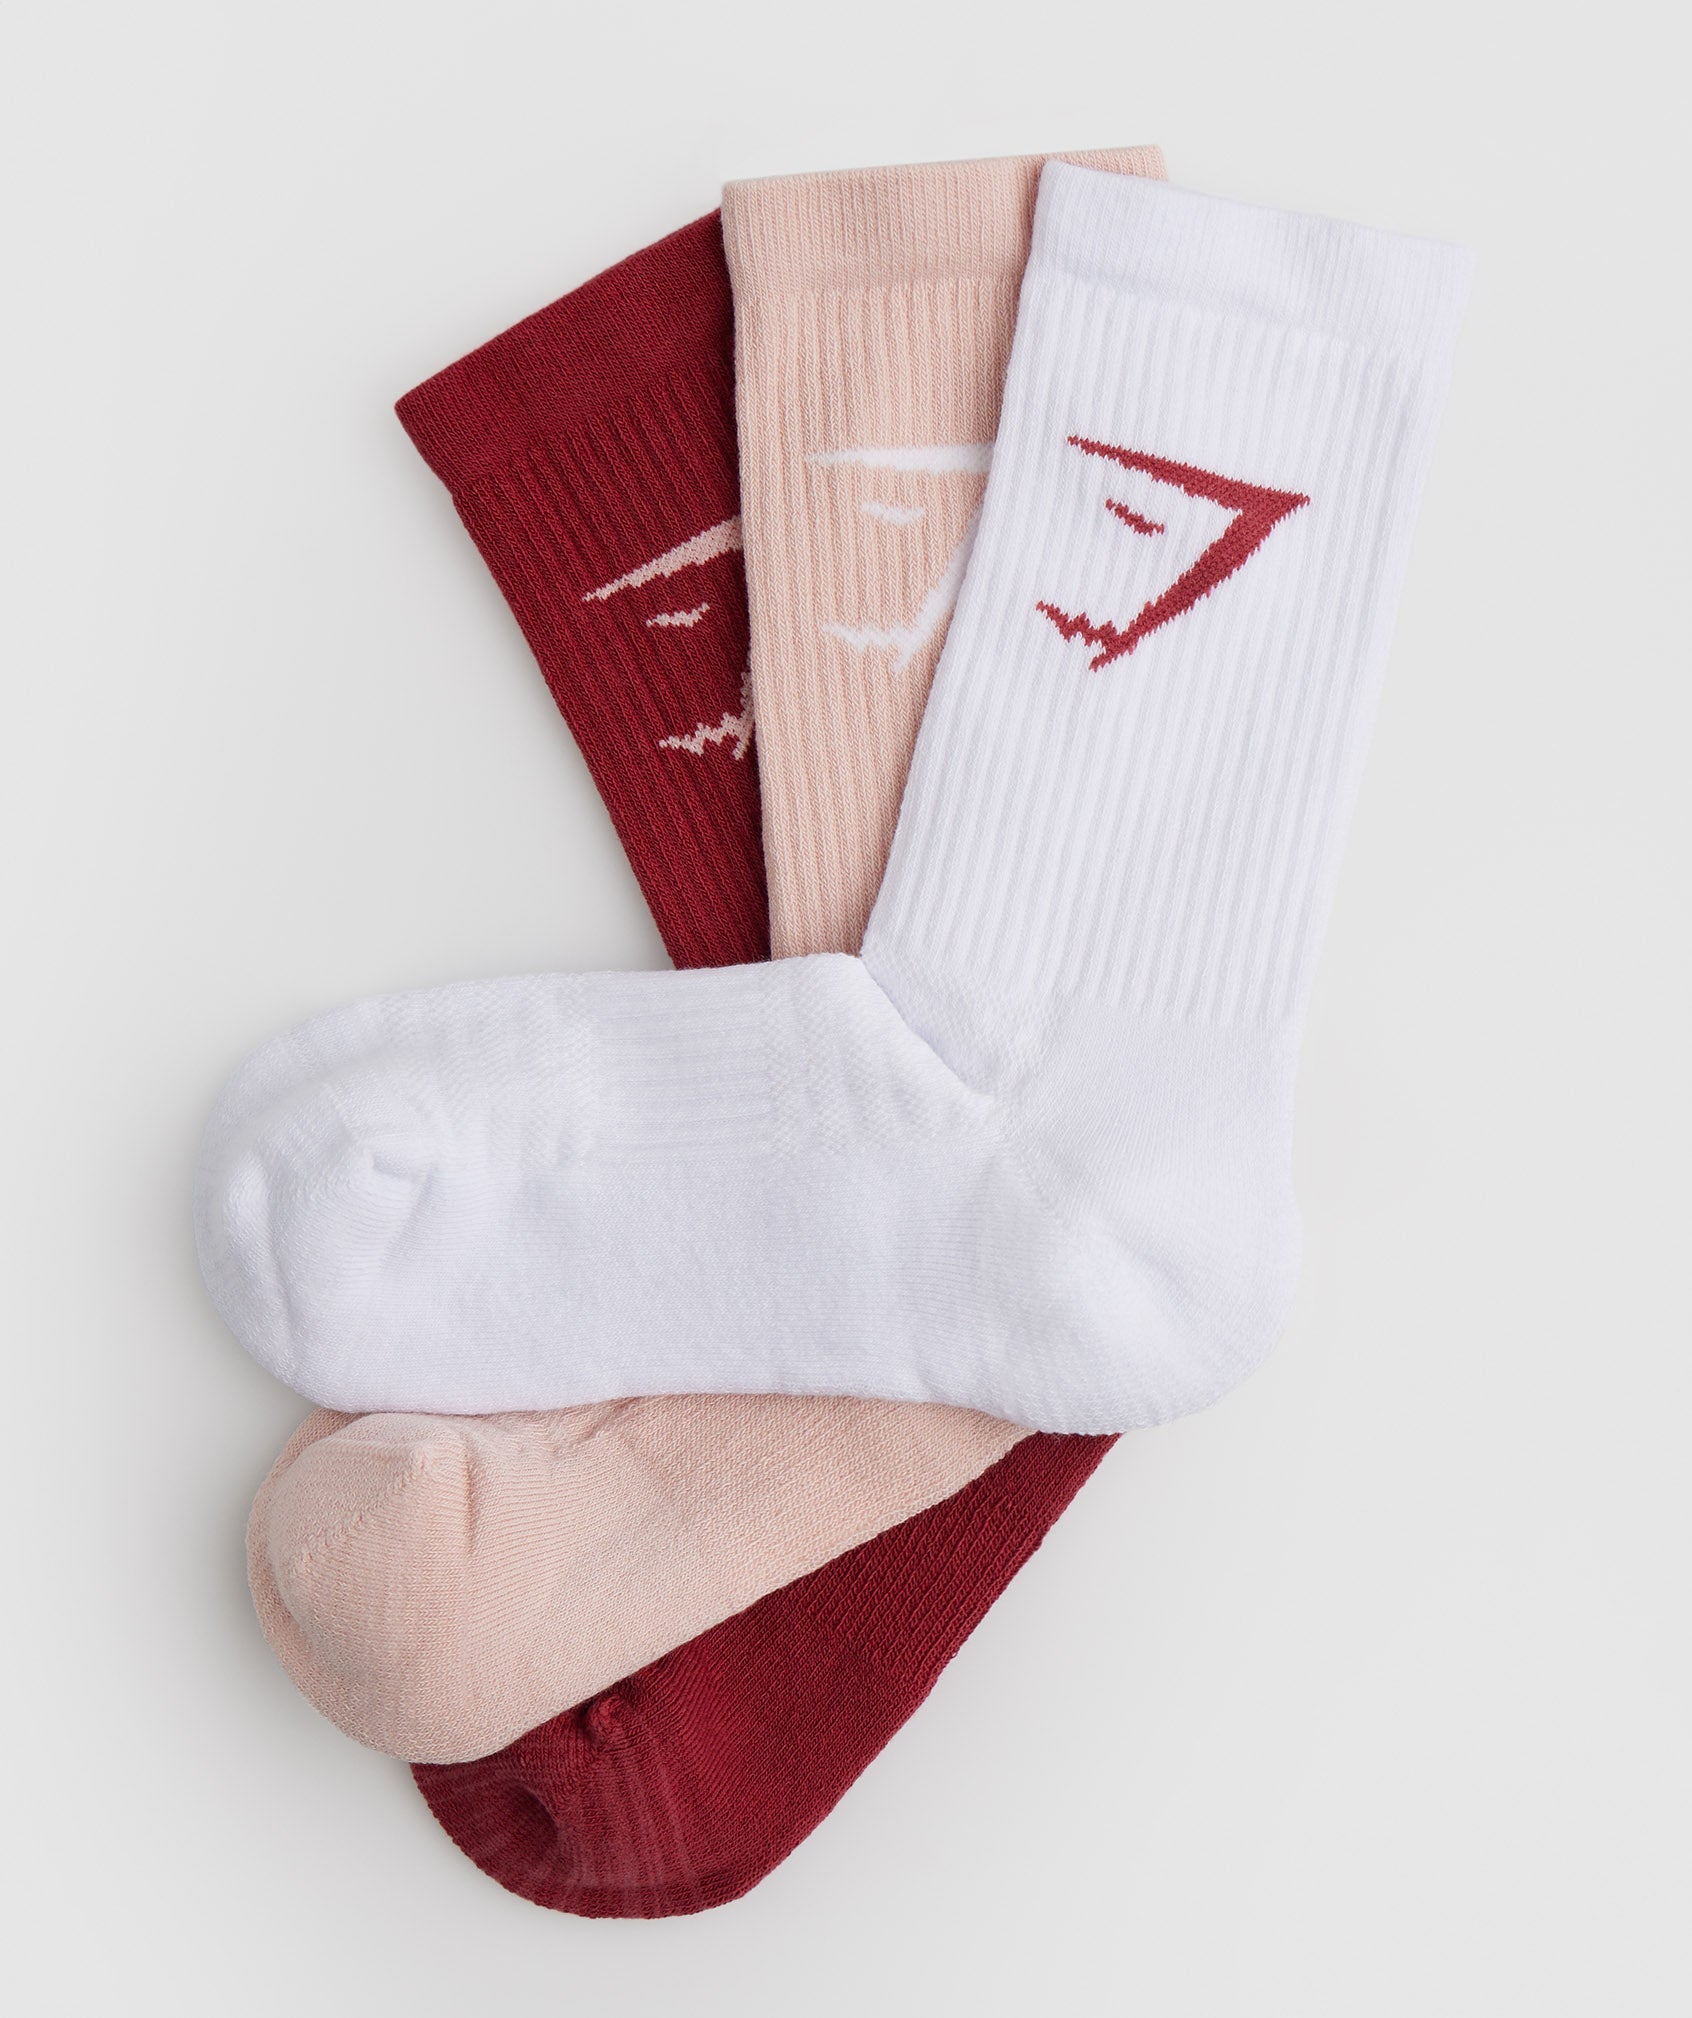 Crew Socks 3pk in White/Pink/Red - view 2